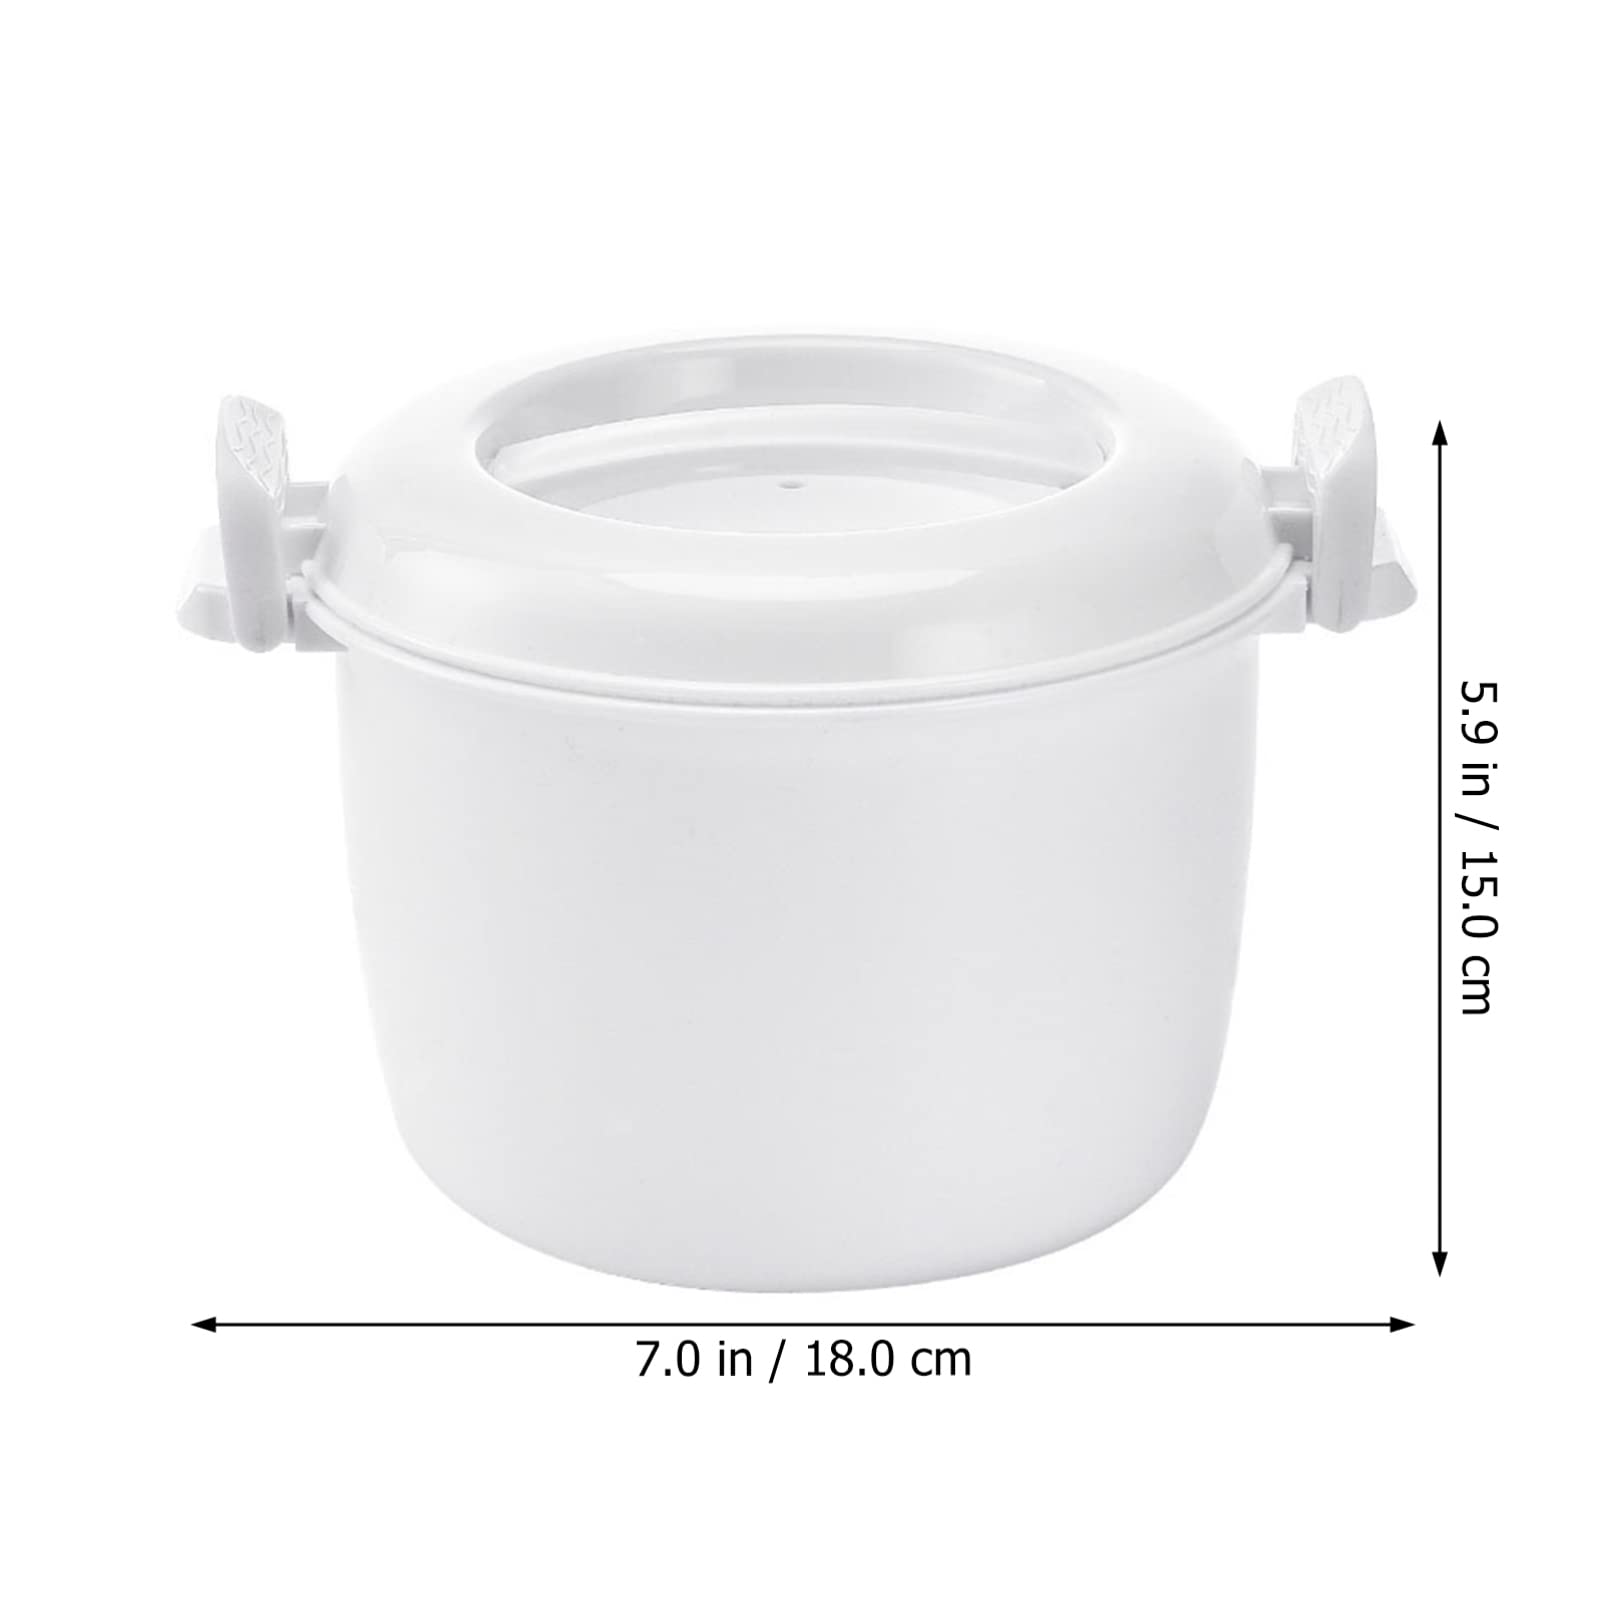 SHERCHPRY Microwave Rice Cooker Plastic Microwave Pressure Cooker with Locking Lid Instant Fast Cookware for Cooking Steaming White